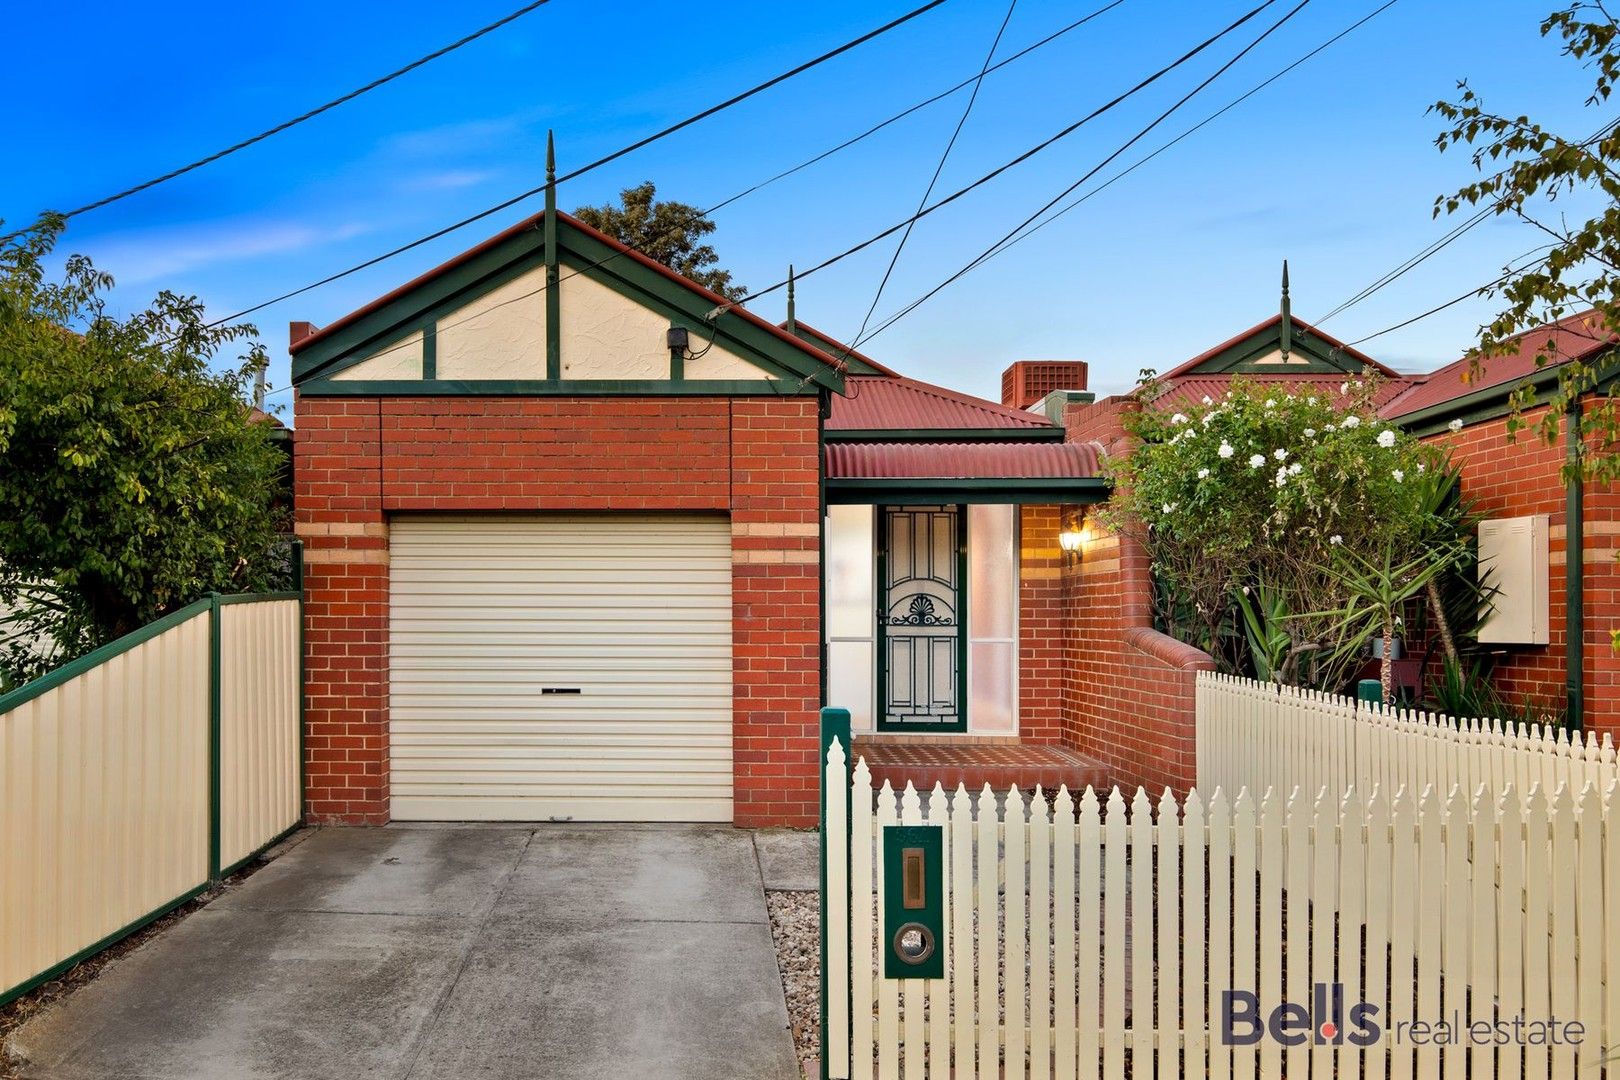 2 bedrooms House in 96A Morris Street SUNSHINE VIC, 3020